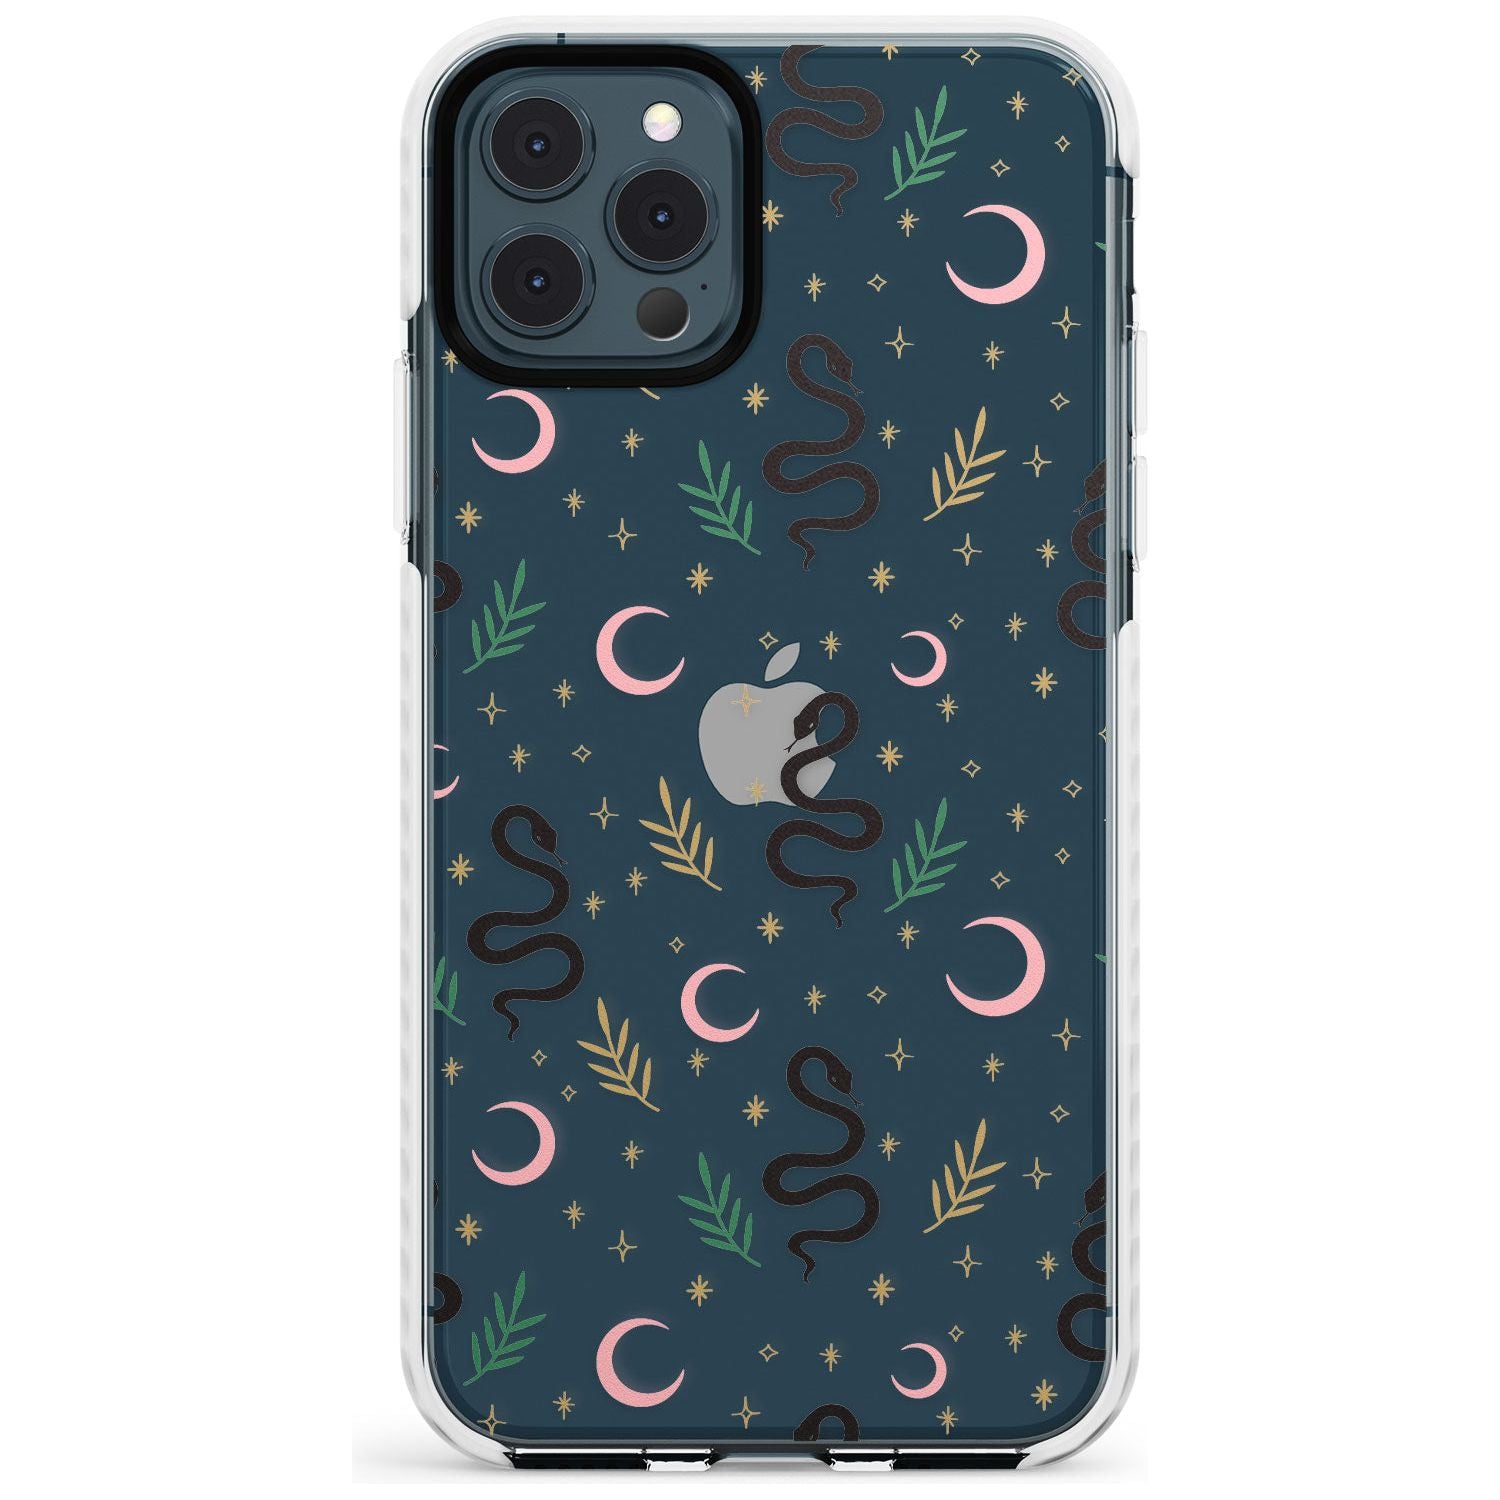 Snake & Moon Pattern (Clear) Slim TPU Phone Case for iPhone 11 Pro Max